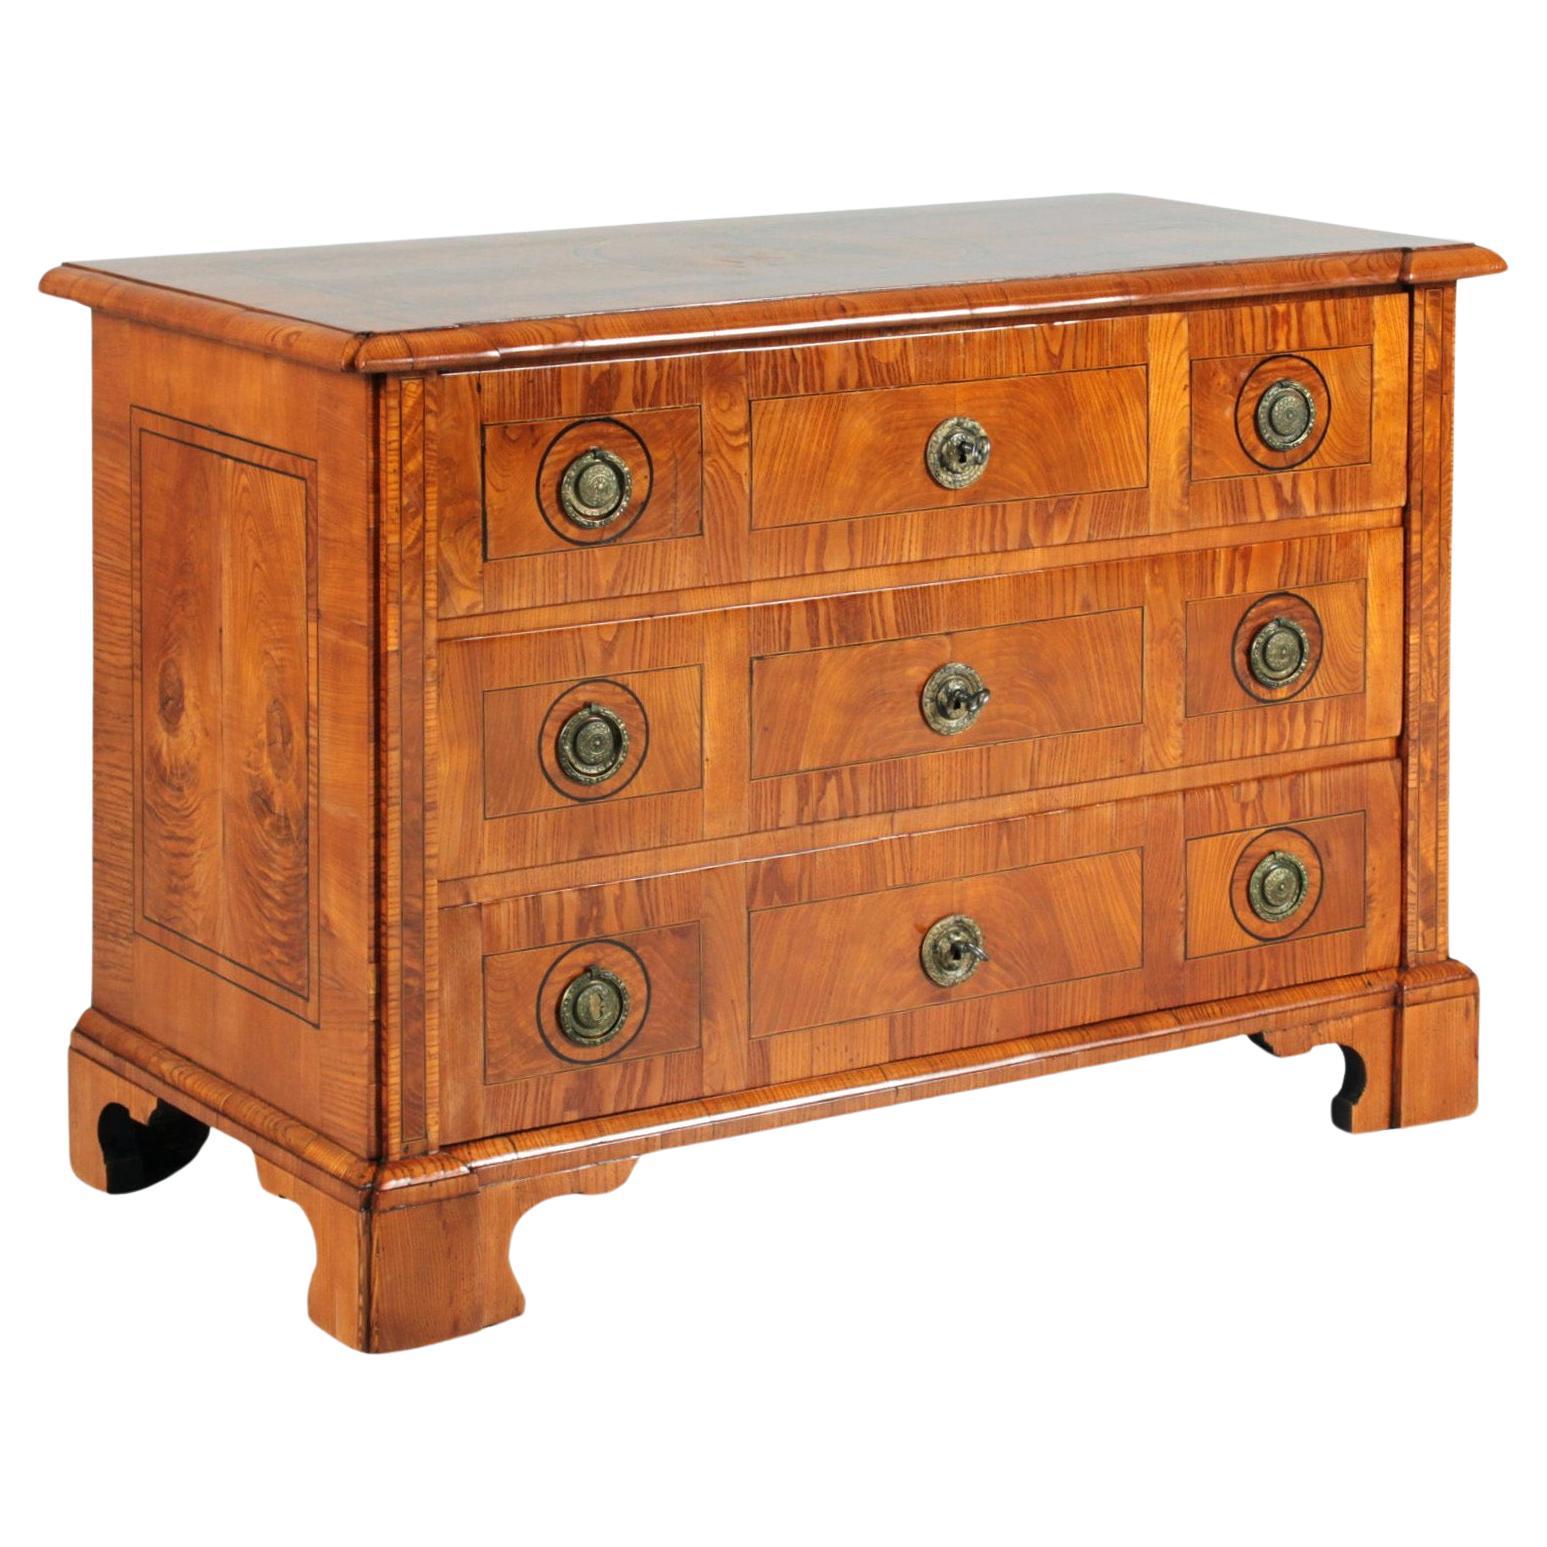 Louis XVI Chest Of Drawers, Ash, Northern Germany, circa 1800